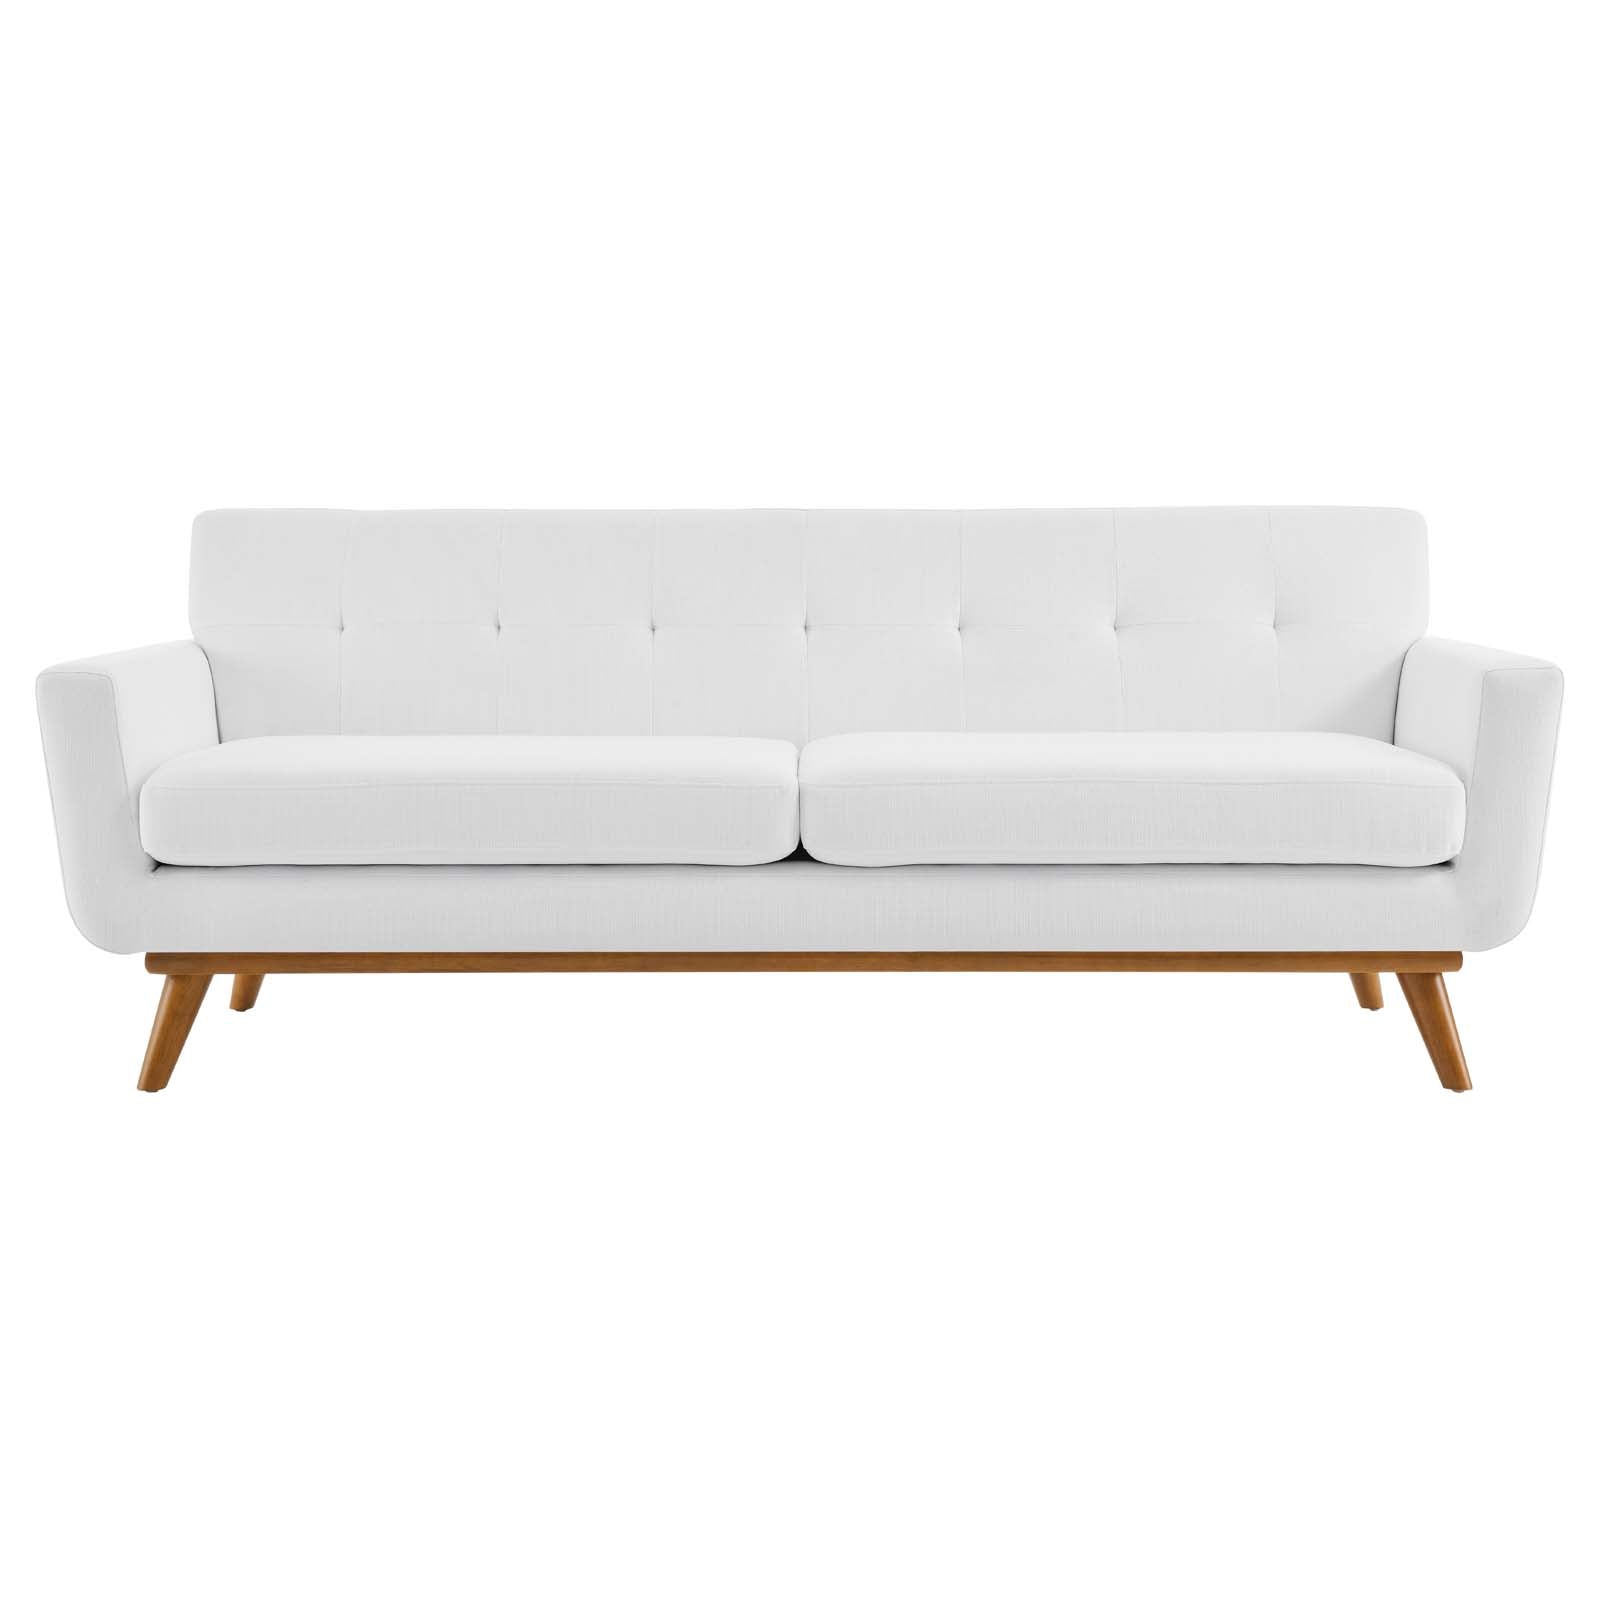 Modway Sofas & Couches - Engage Upholstered Fabric Sofa White